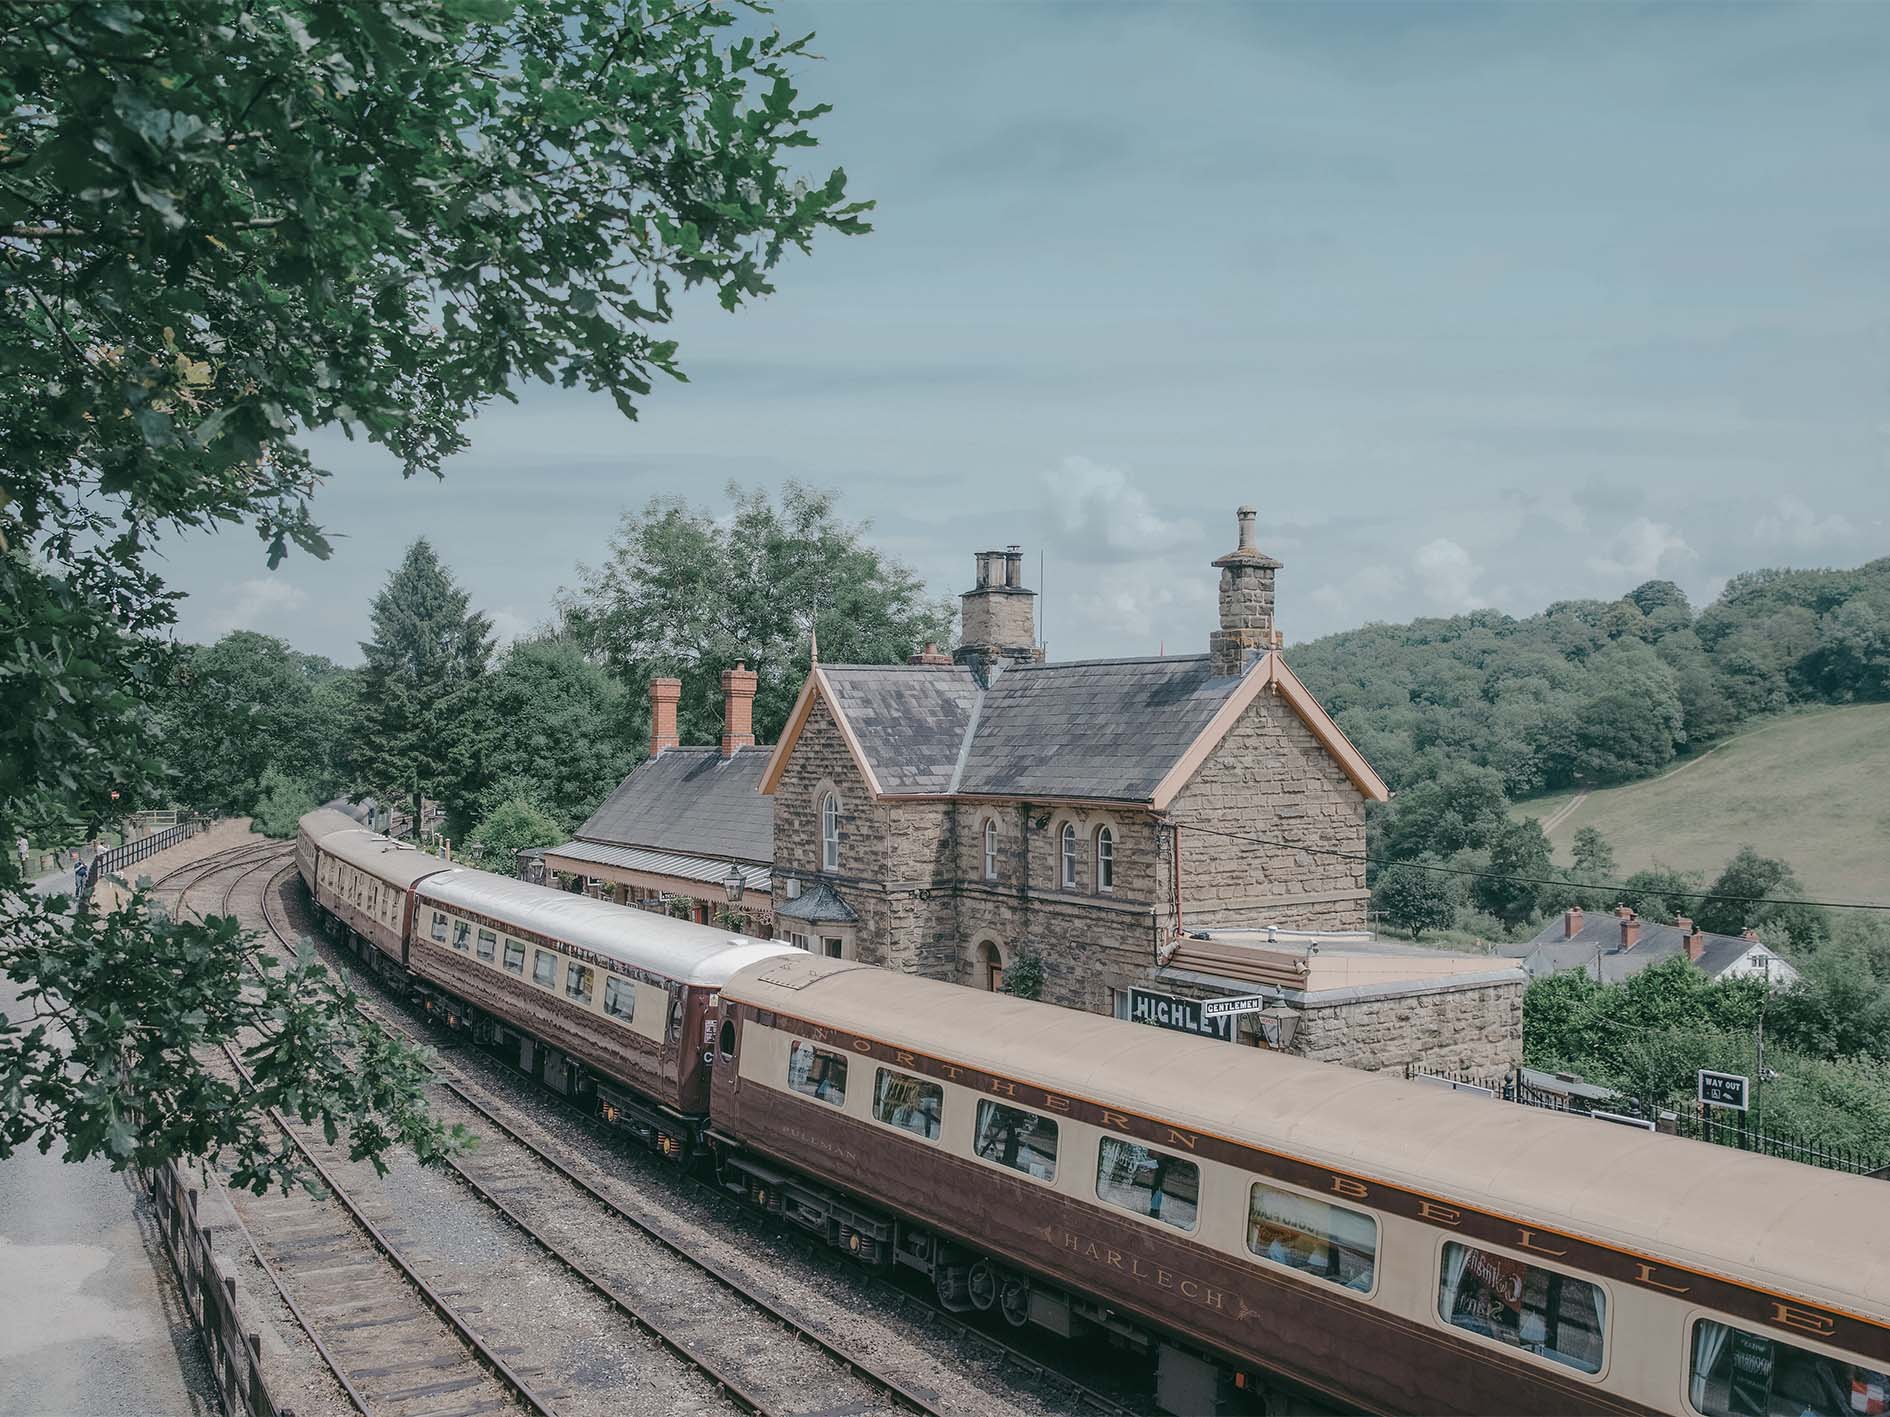 The Northern Belle pulled in at a countryside station